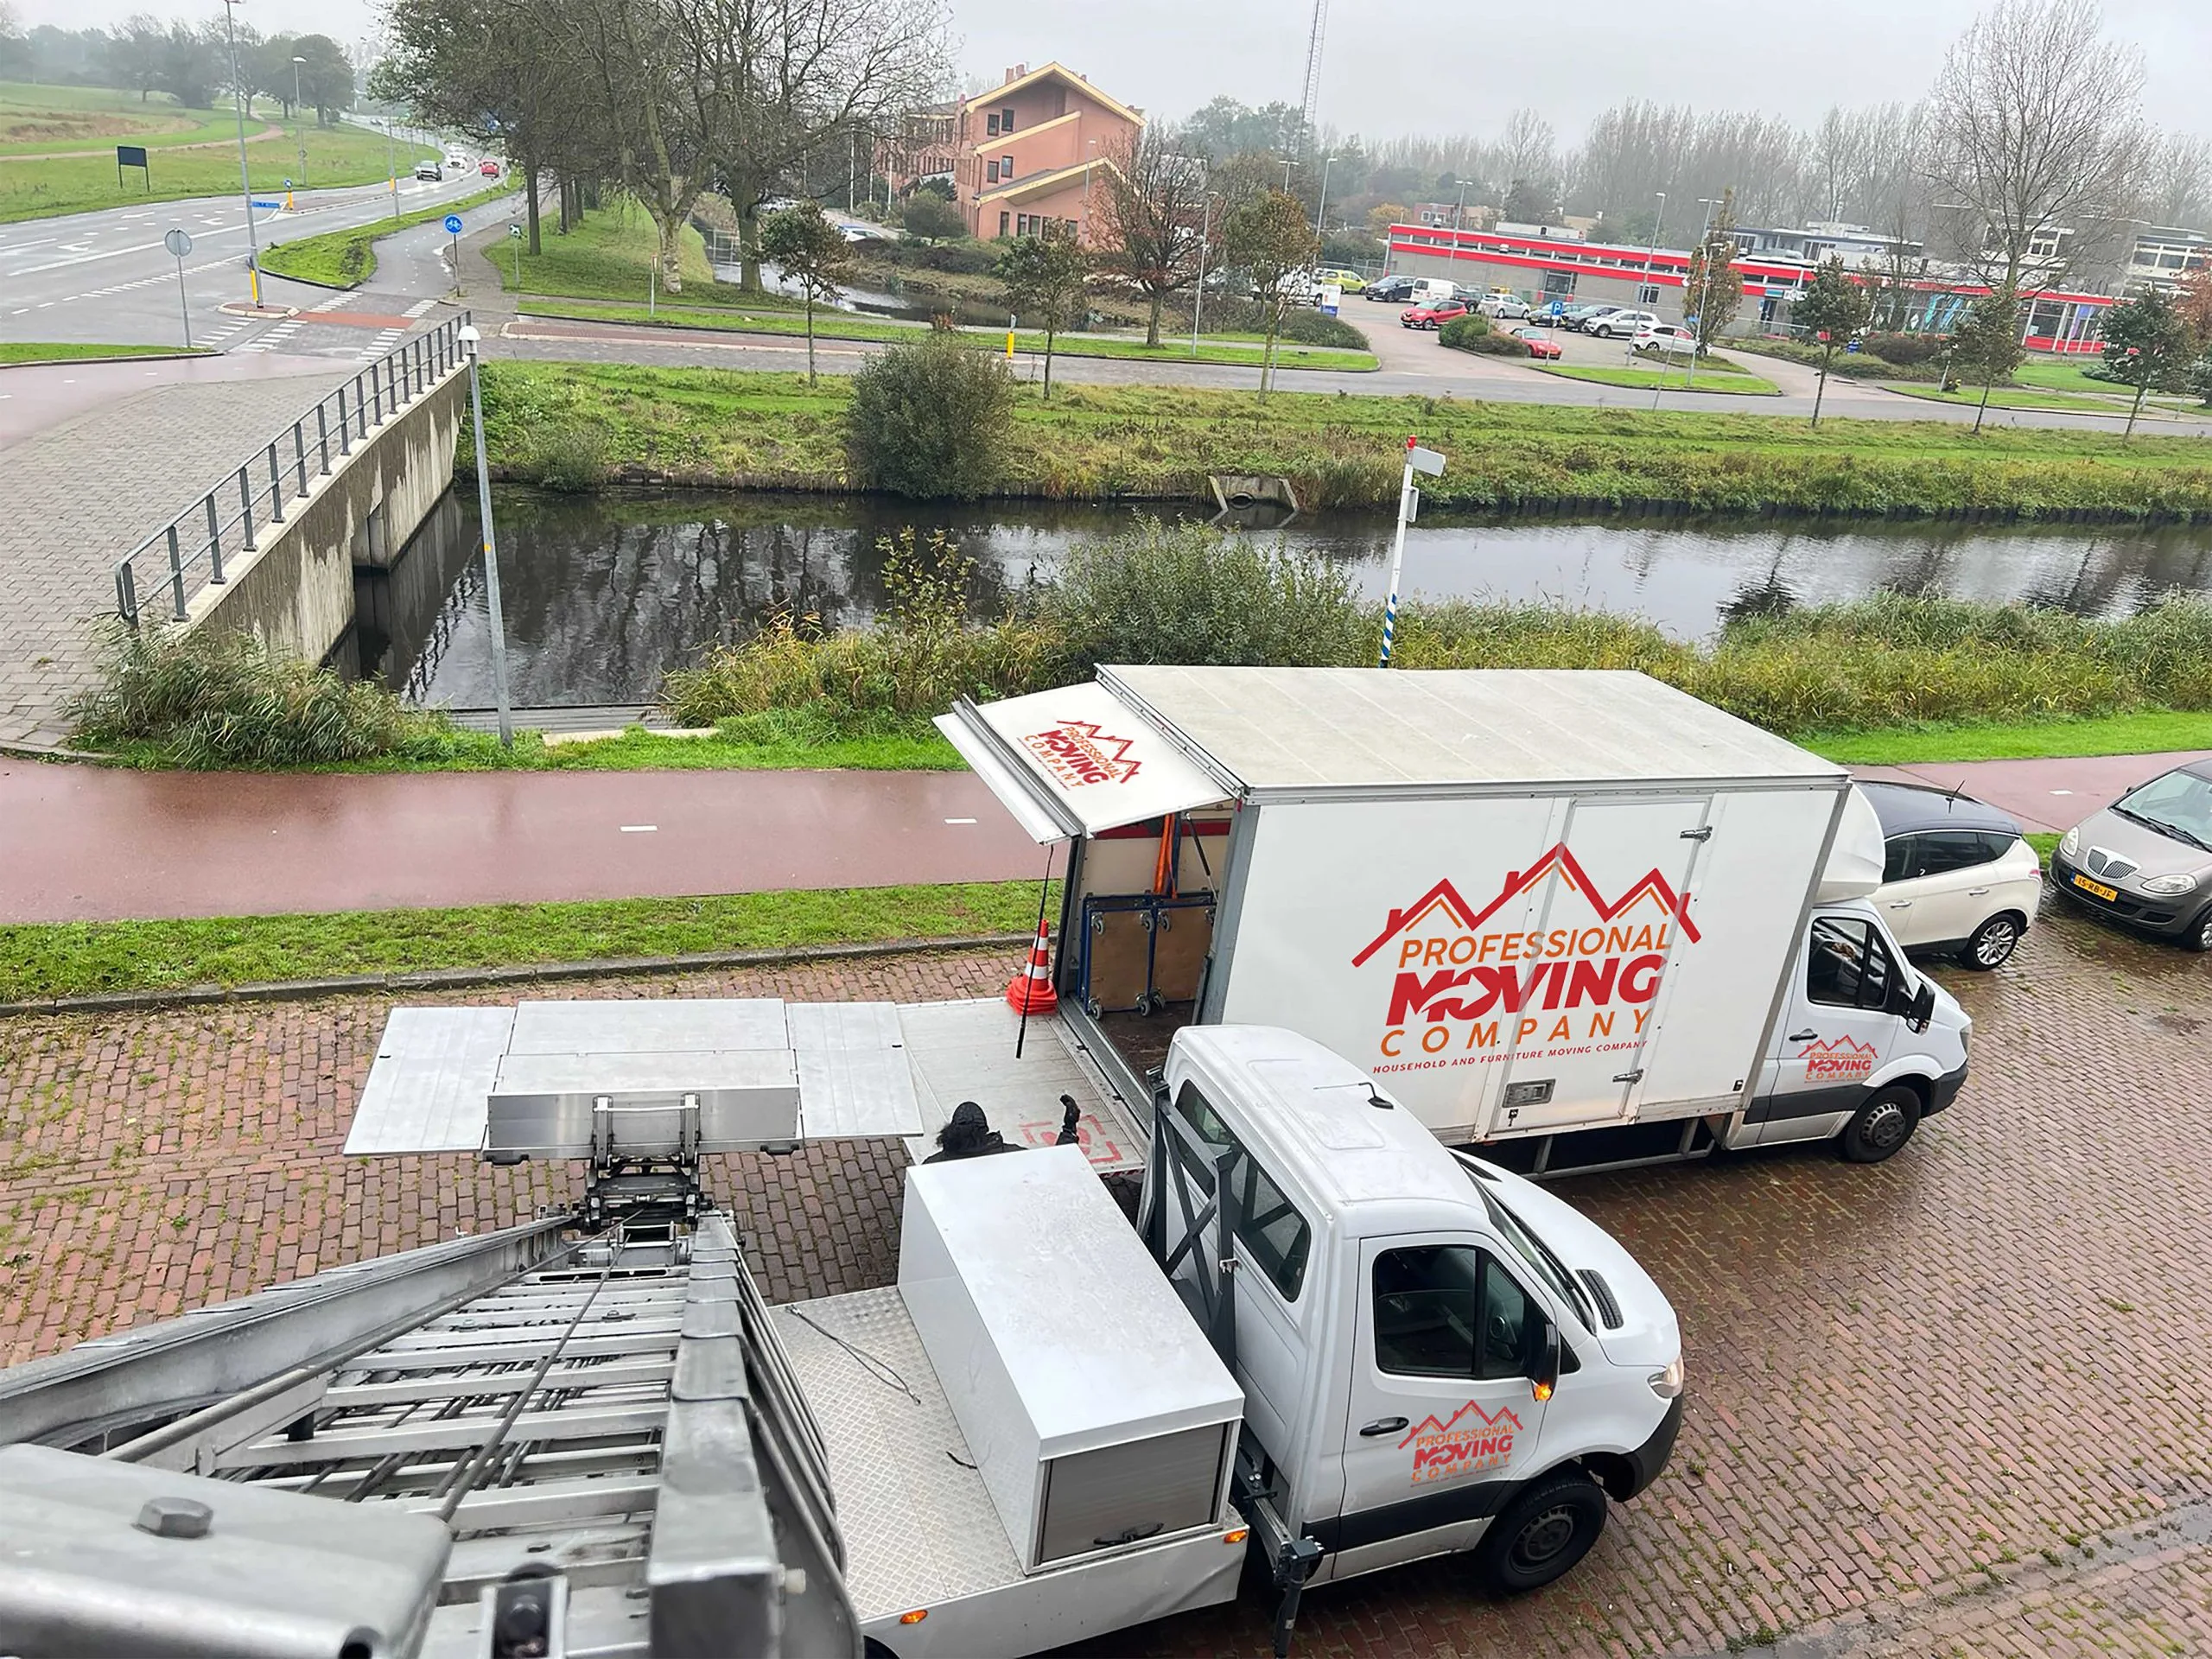 Moving Company Pijnacker-Nootdorp | Services: Comprehensive Moving Solutions